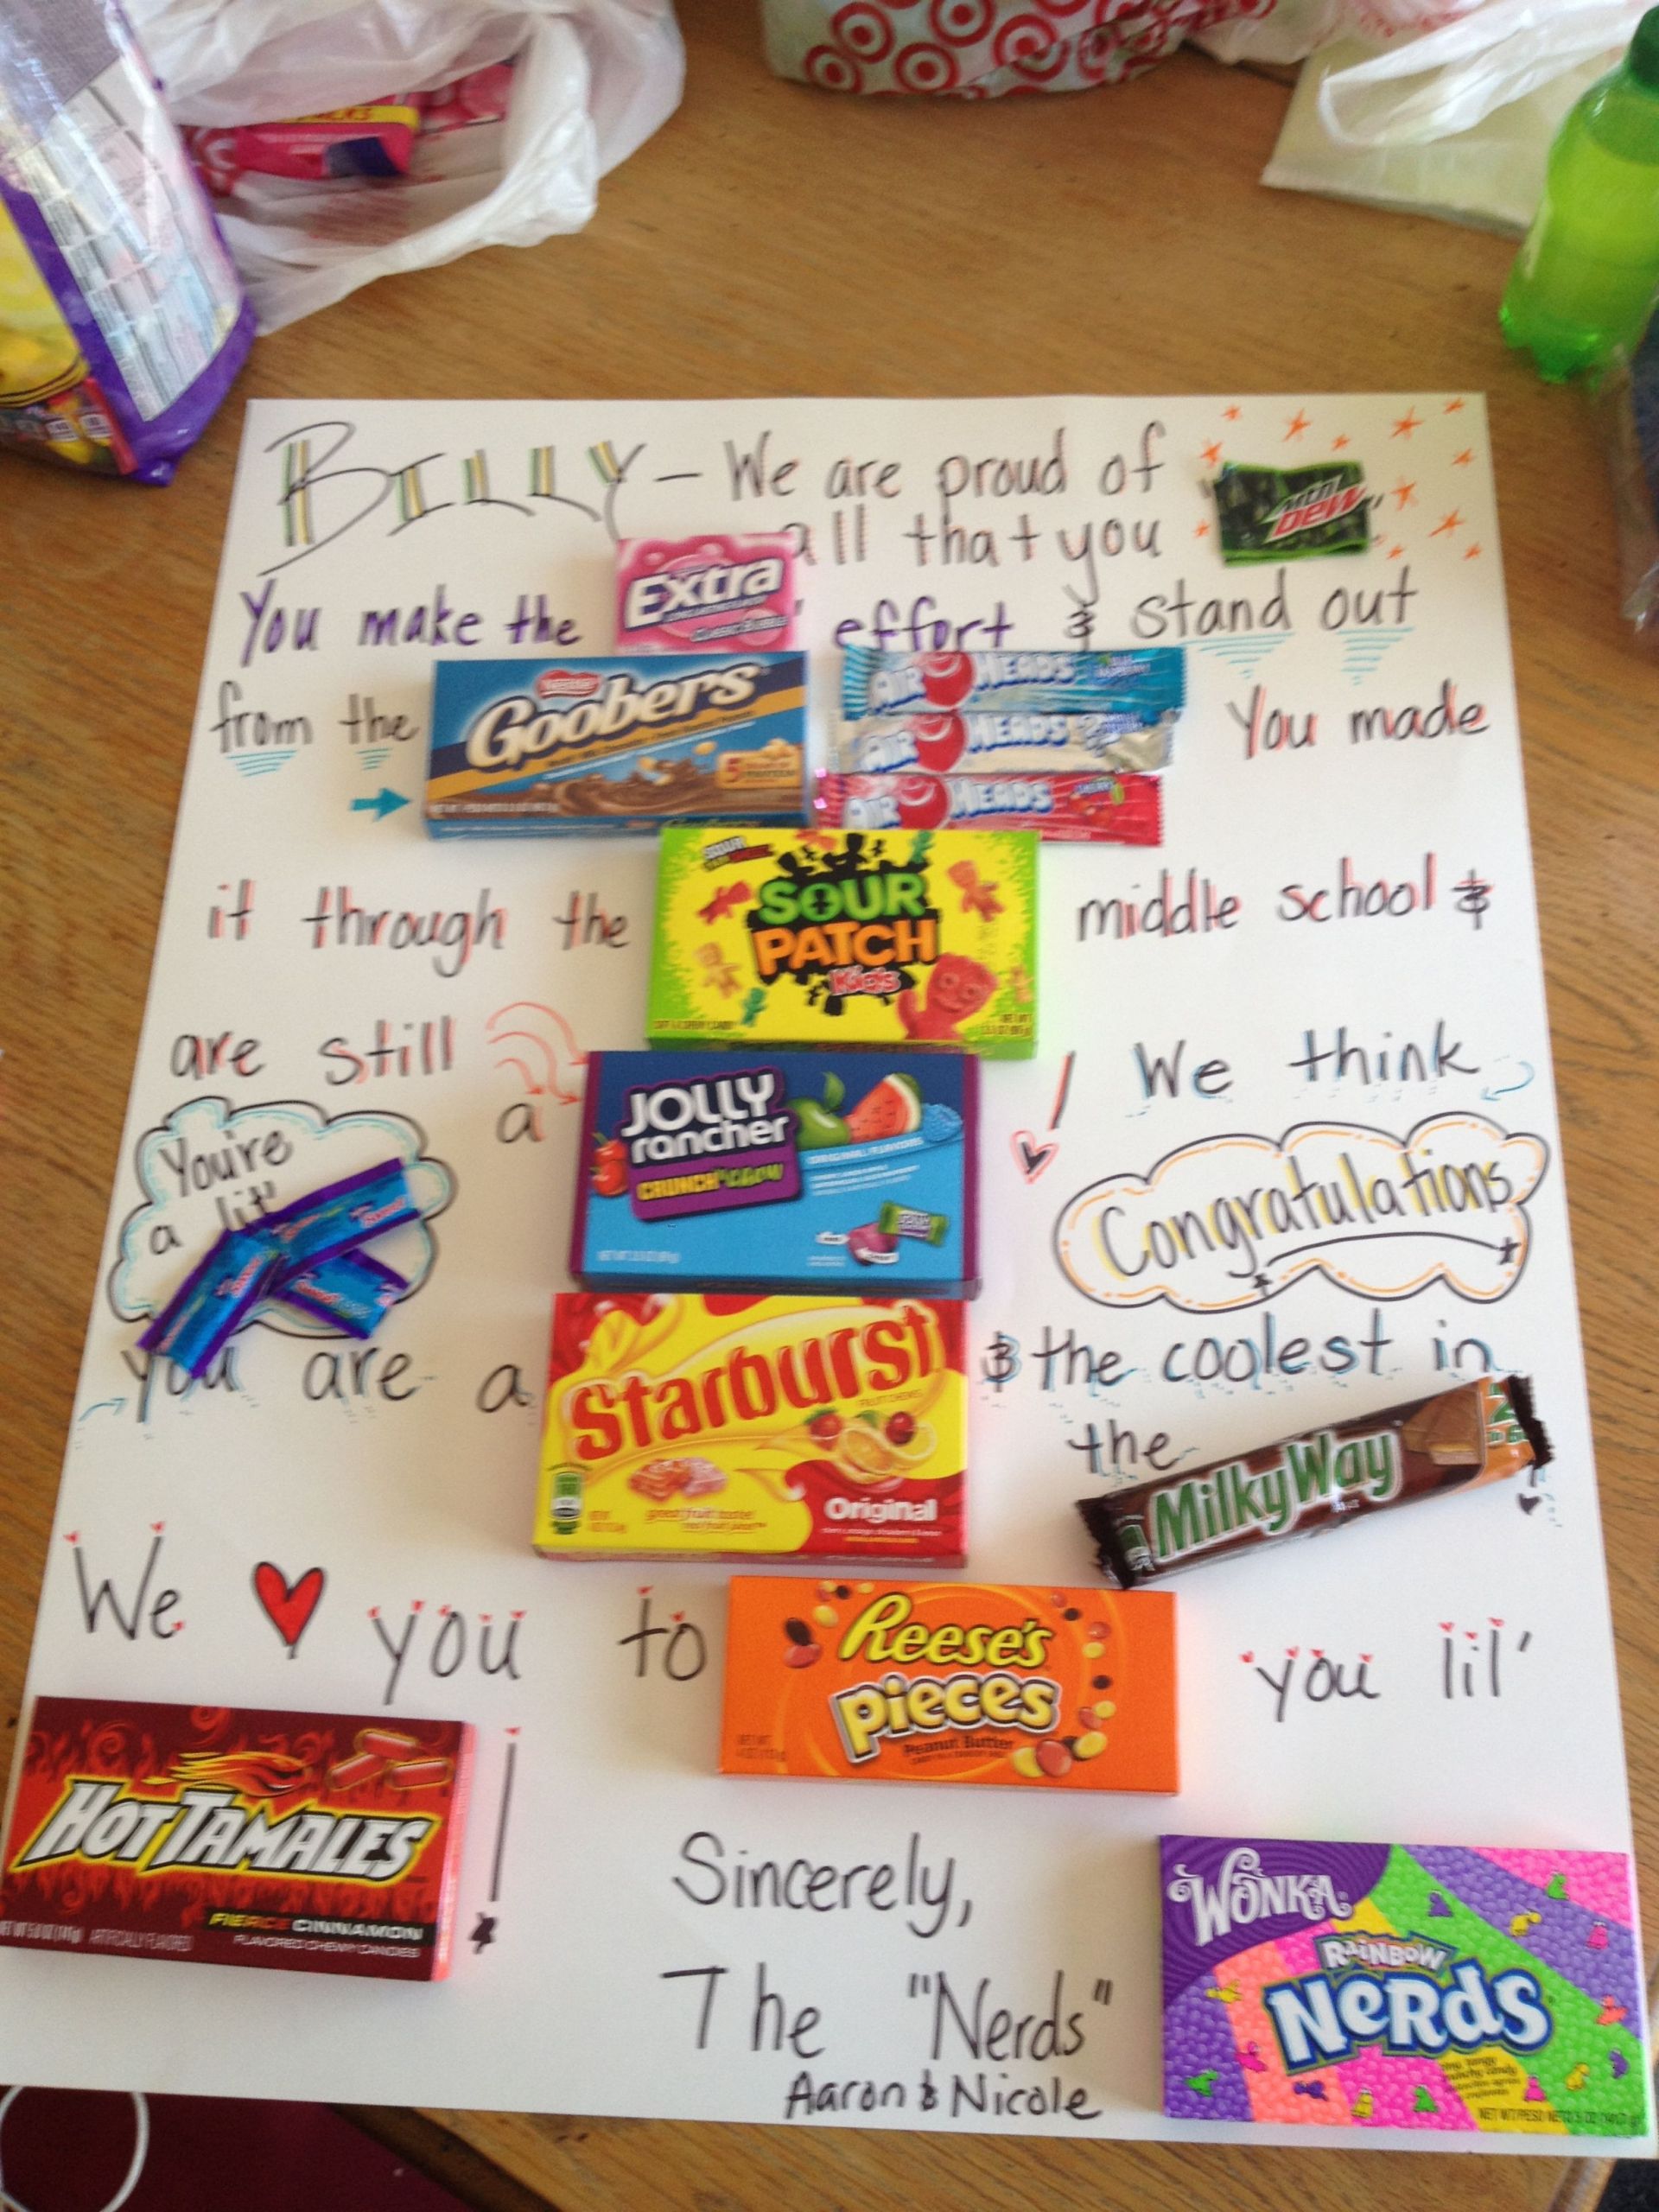 Middle School Graduation Gift Ideas Boys
 A candy card for a boy promoting graduating middle school